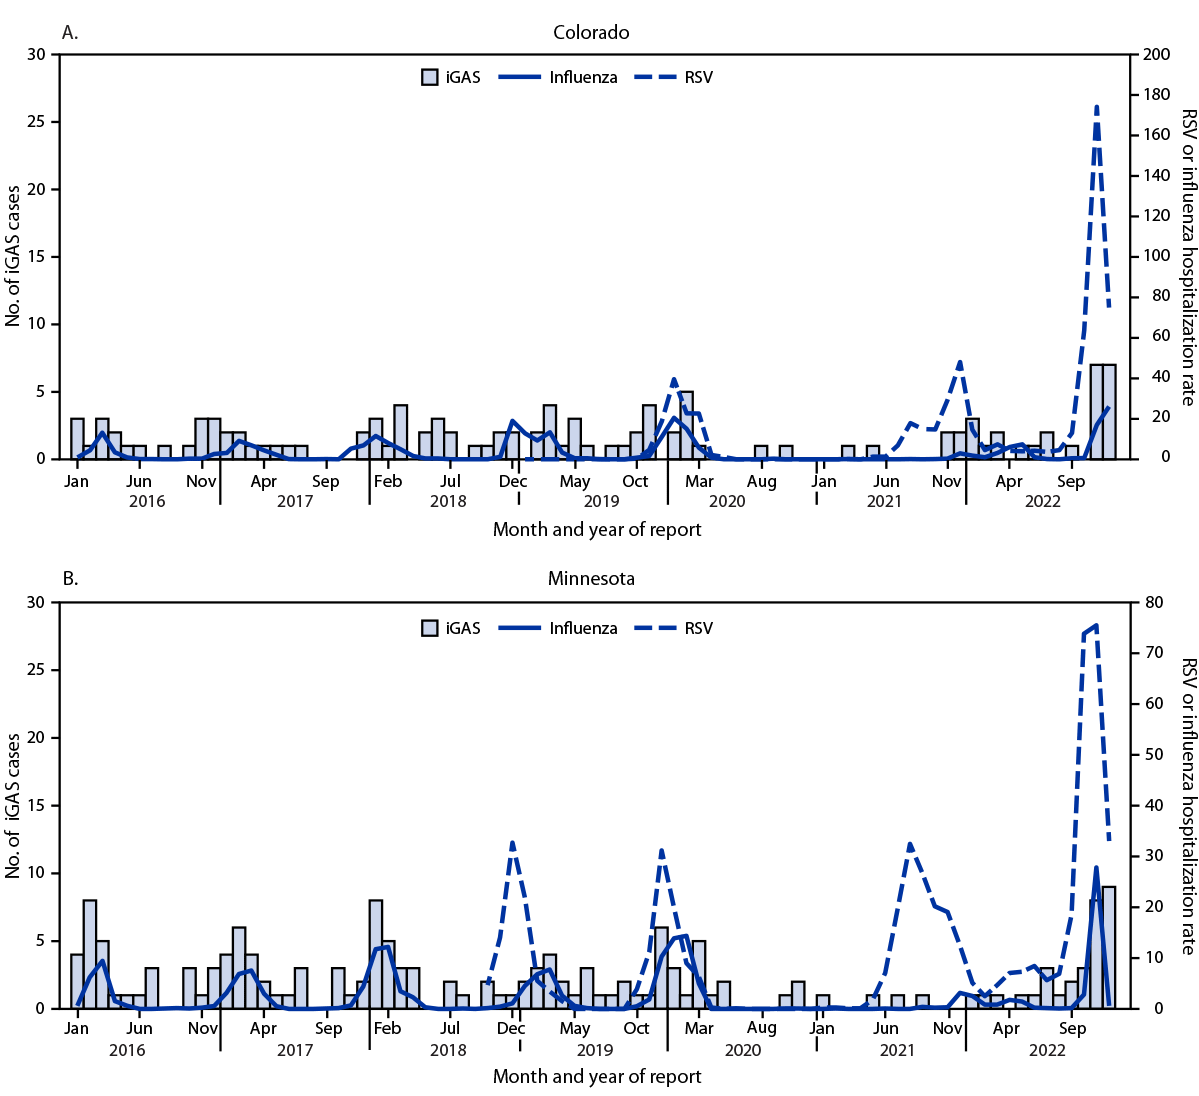 The figure comprises two histograms showing cases of invasive group A Streptococcus infections and hospitalization rates for influenza and respiratory syncytial virus among children and adolescents aged under 18 years in Colorado and Minnesota during January 2016–December 2022.